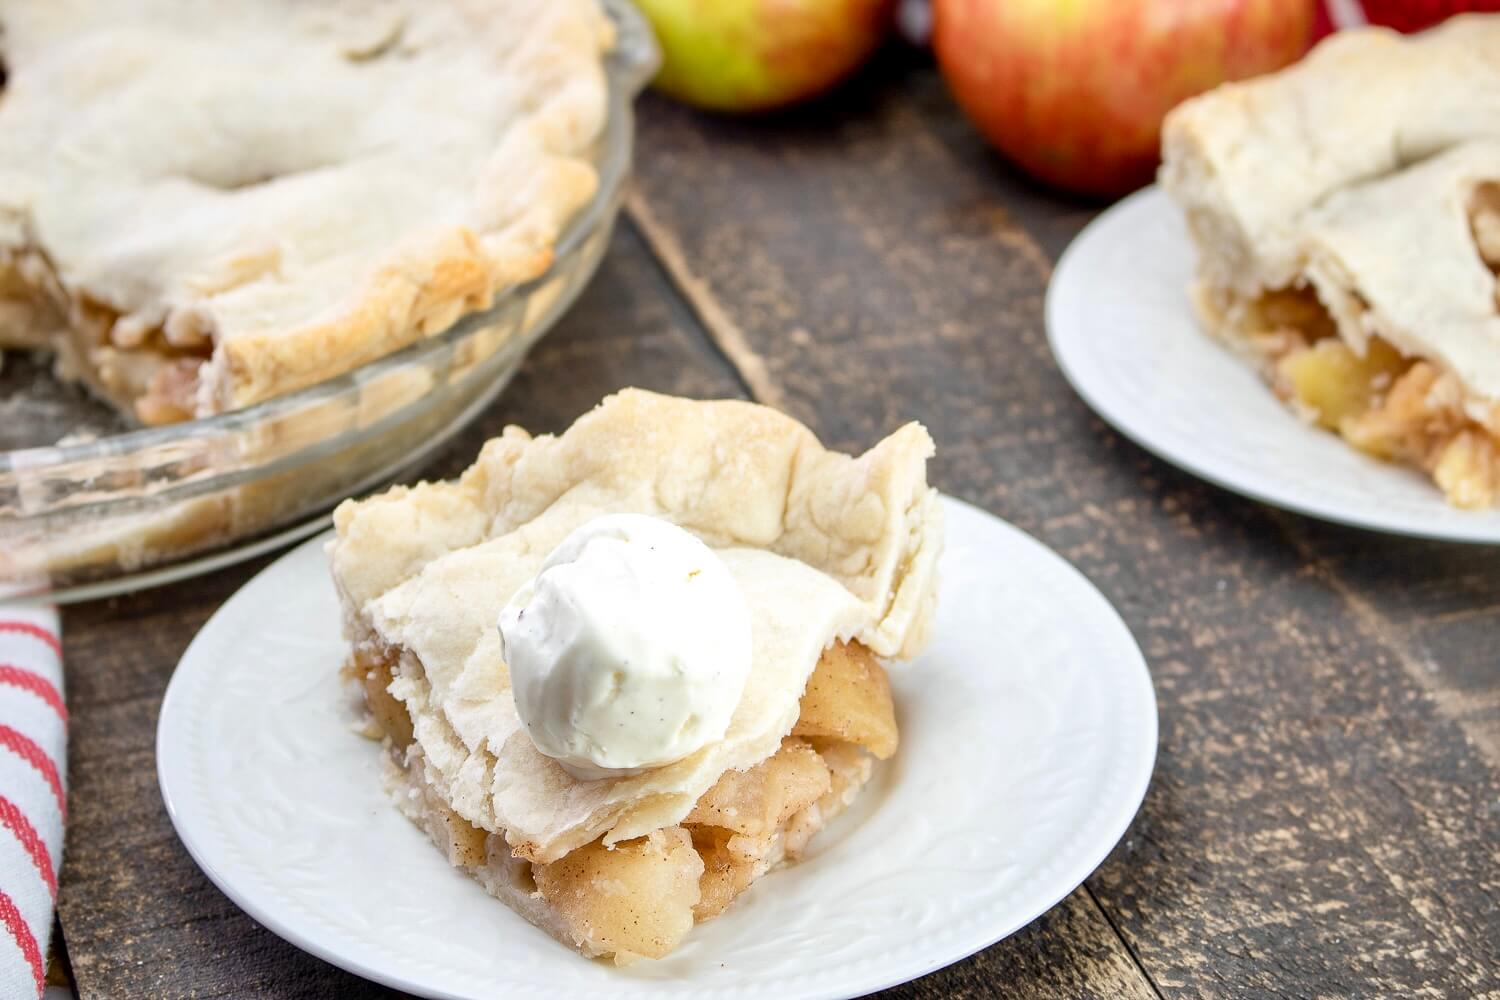 Slice of Apple pie on saucer with ice cream on top